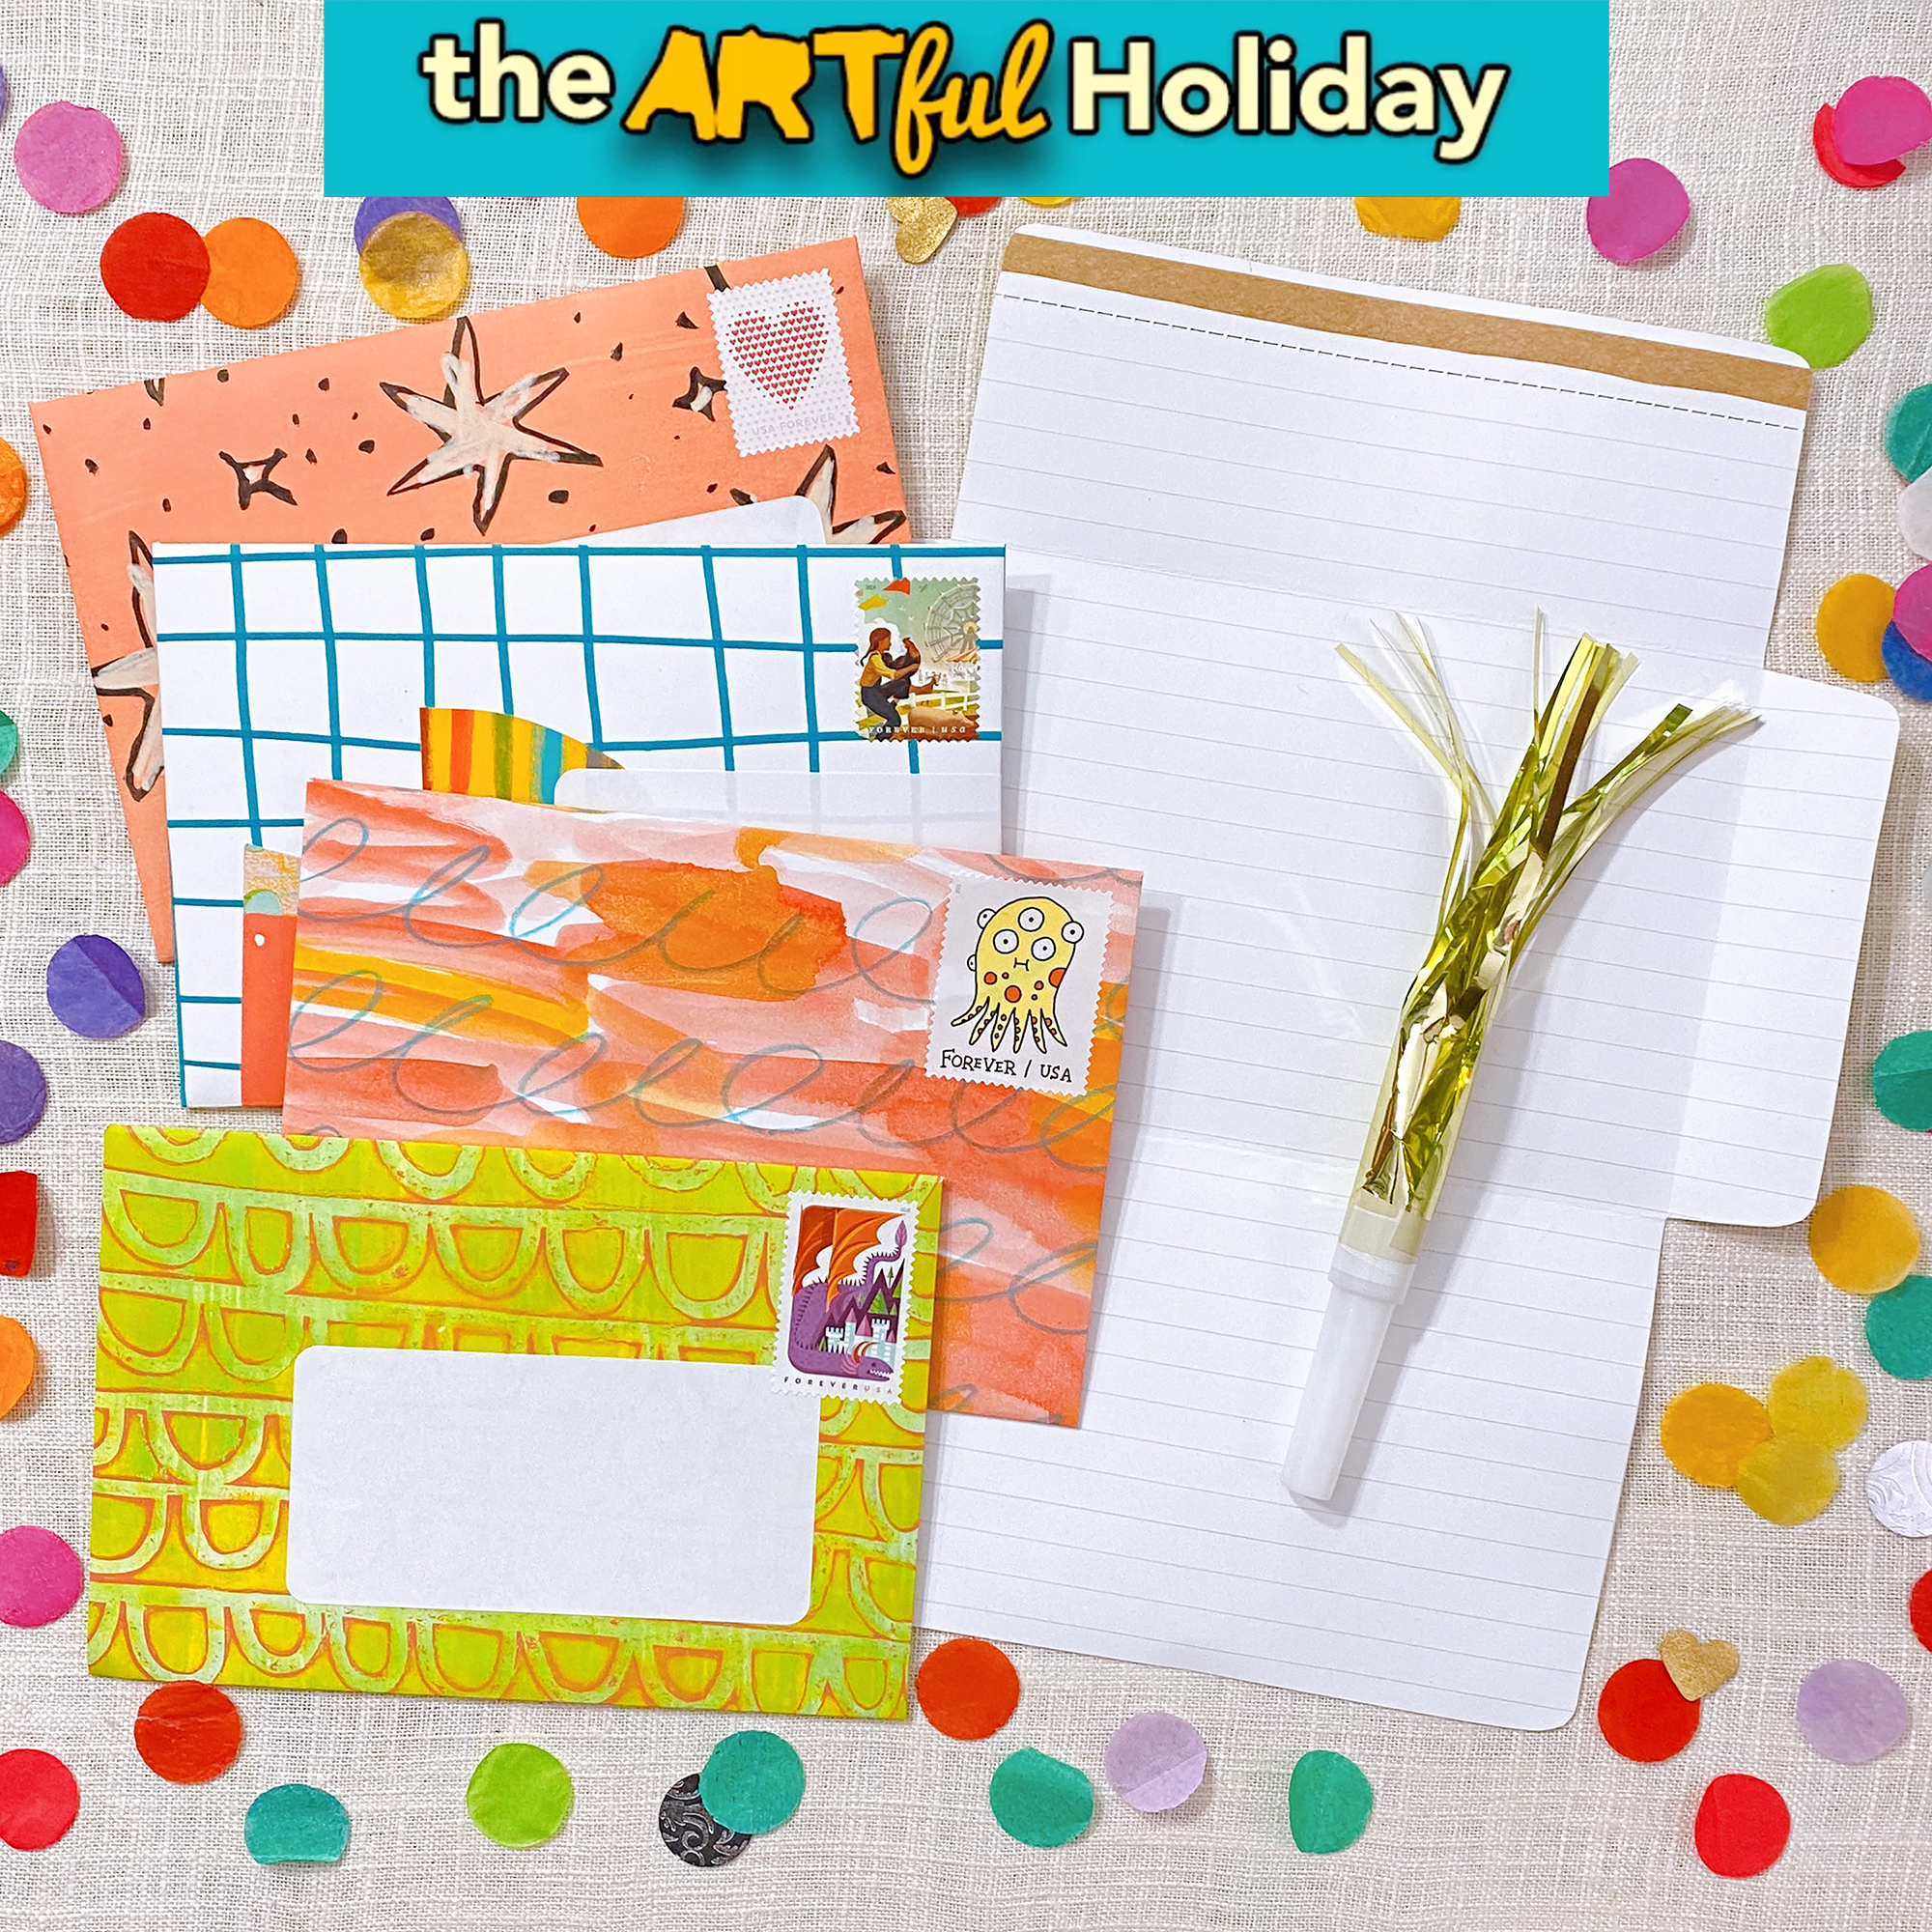 The Artful Holiday Class